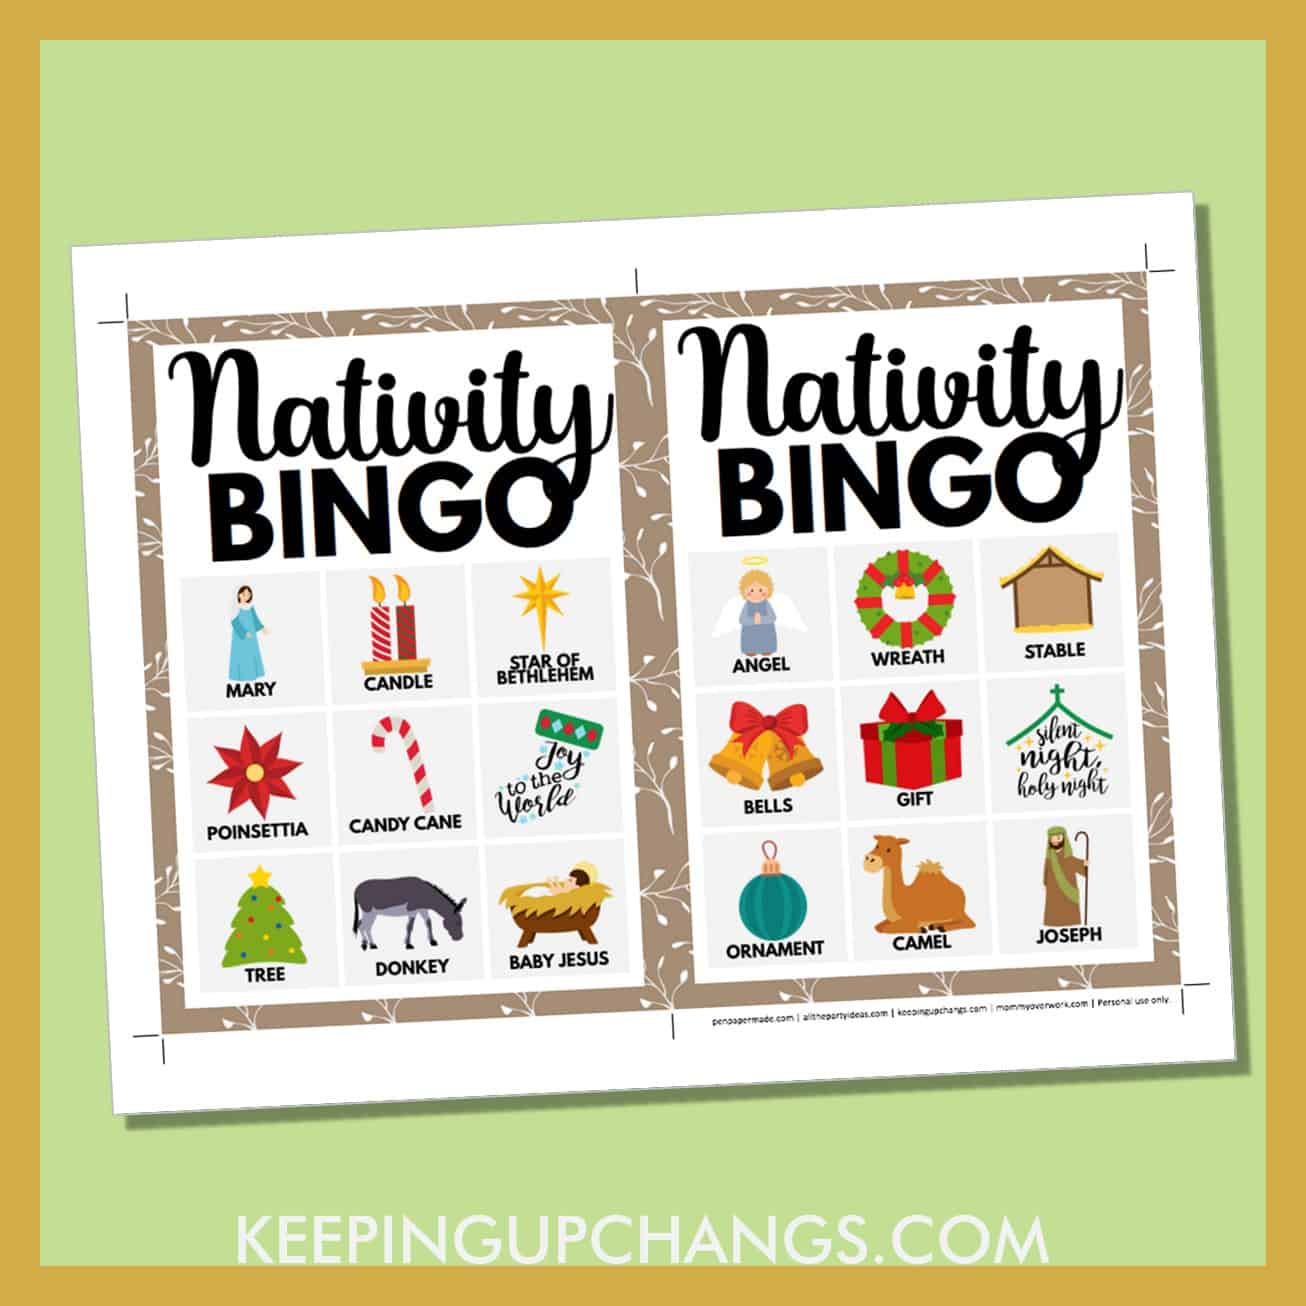 free bible nativity christmas bingo card 3x3 5x7 game boards with images and text words.